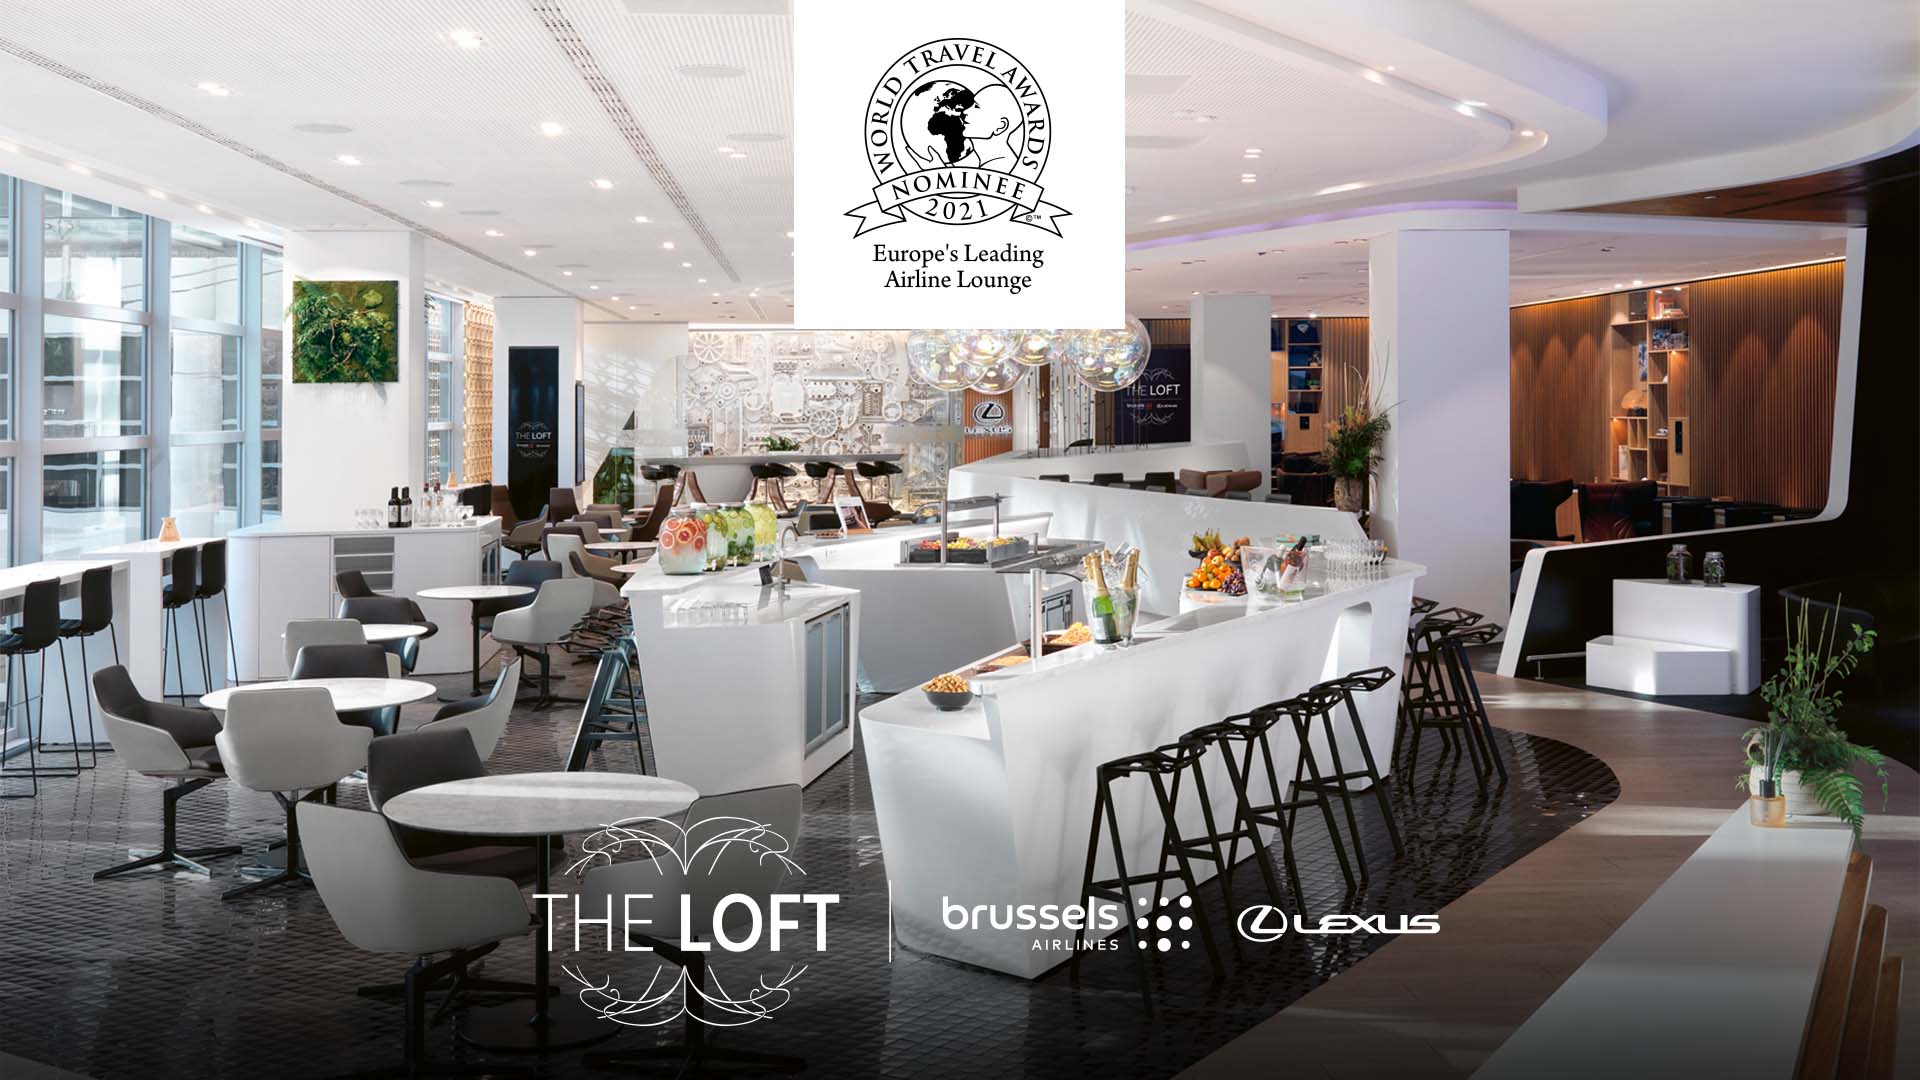 The Loft by Brussels airlines and Lexus